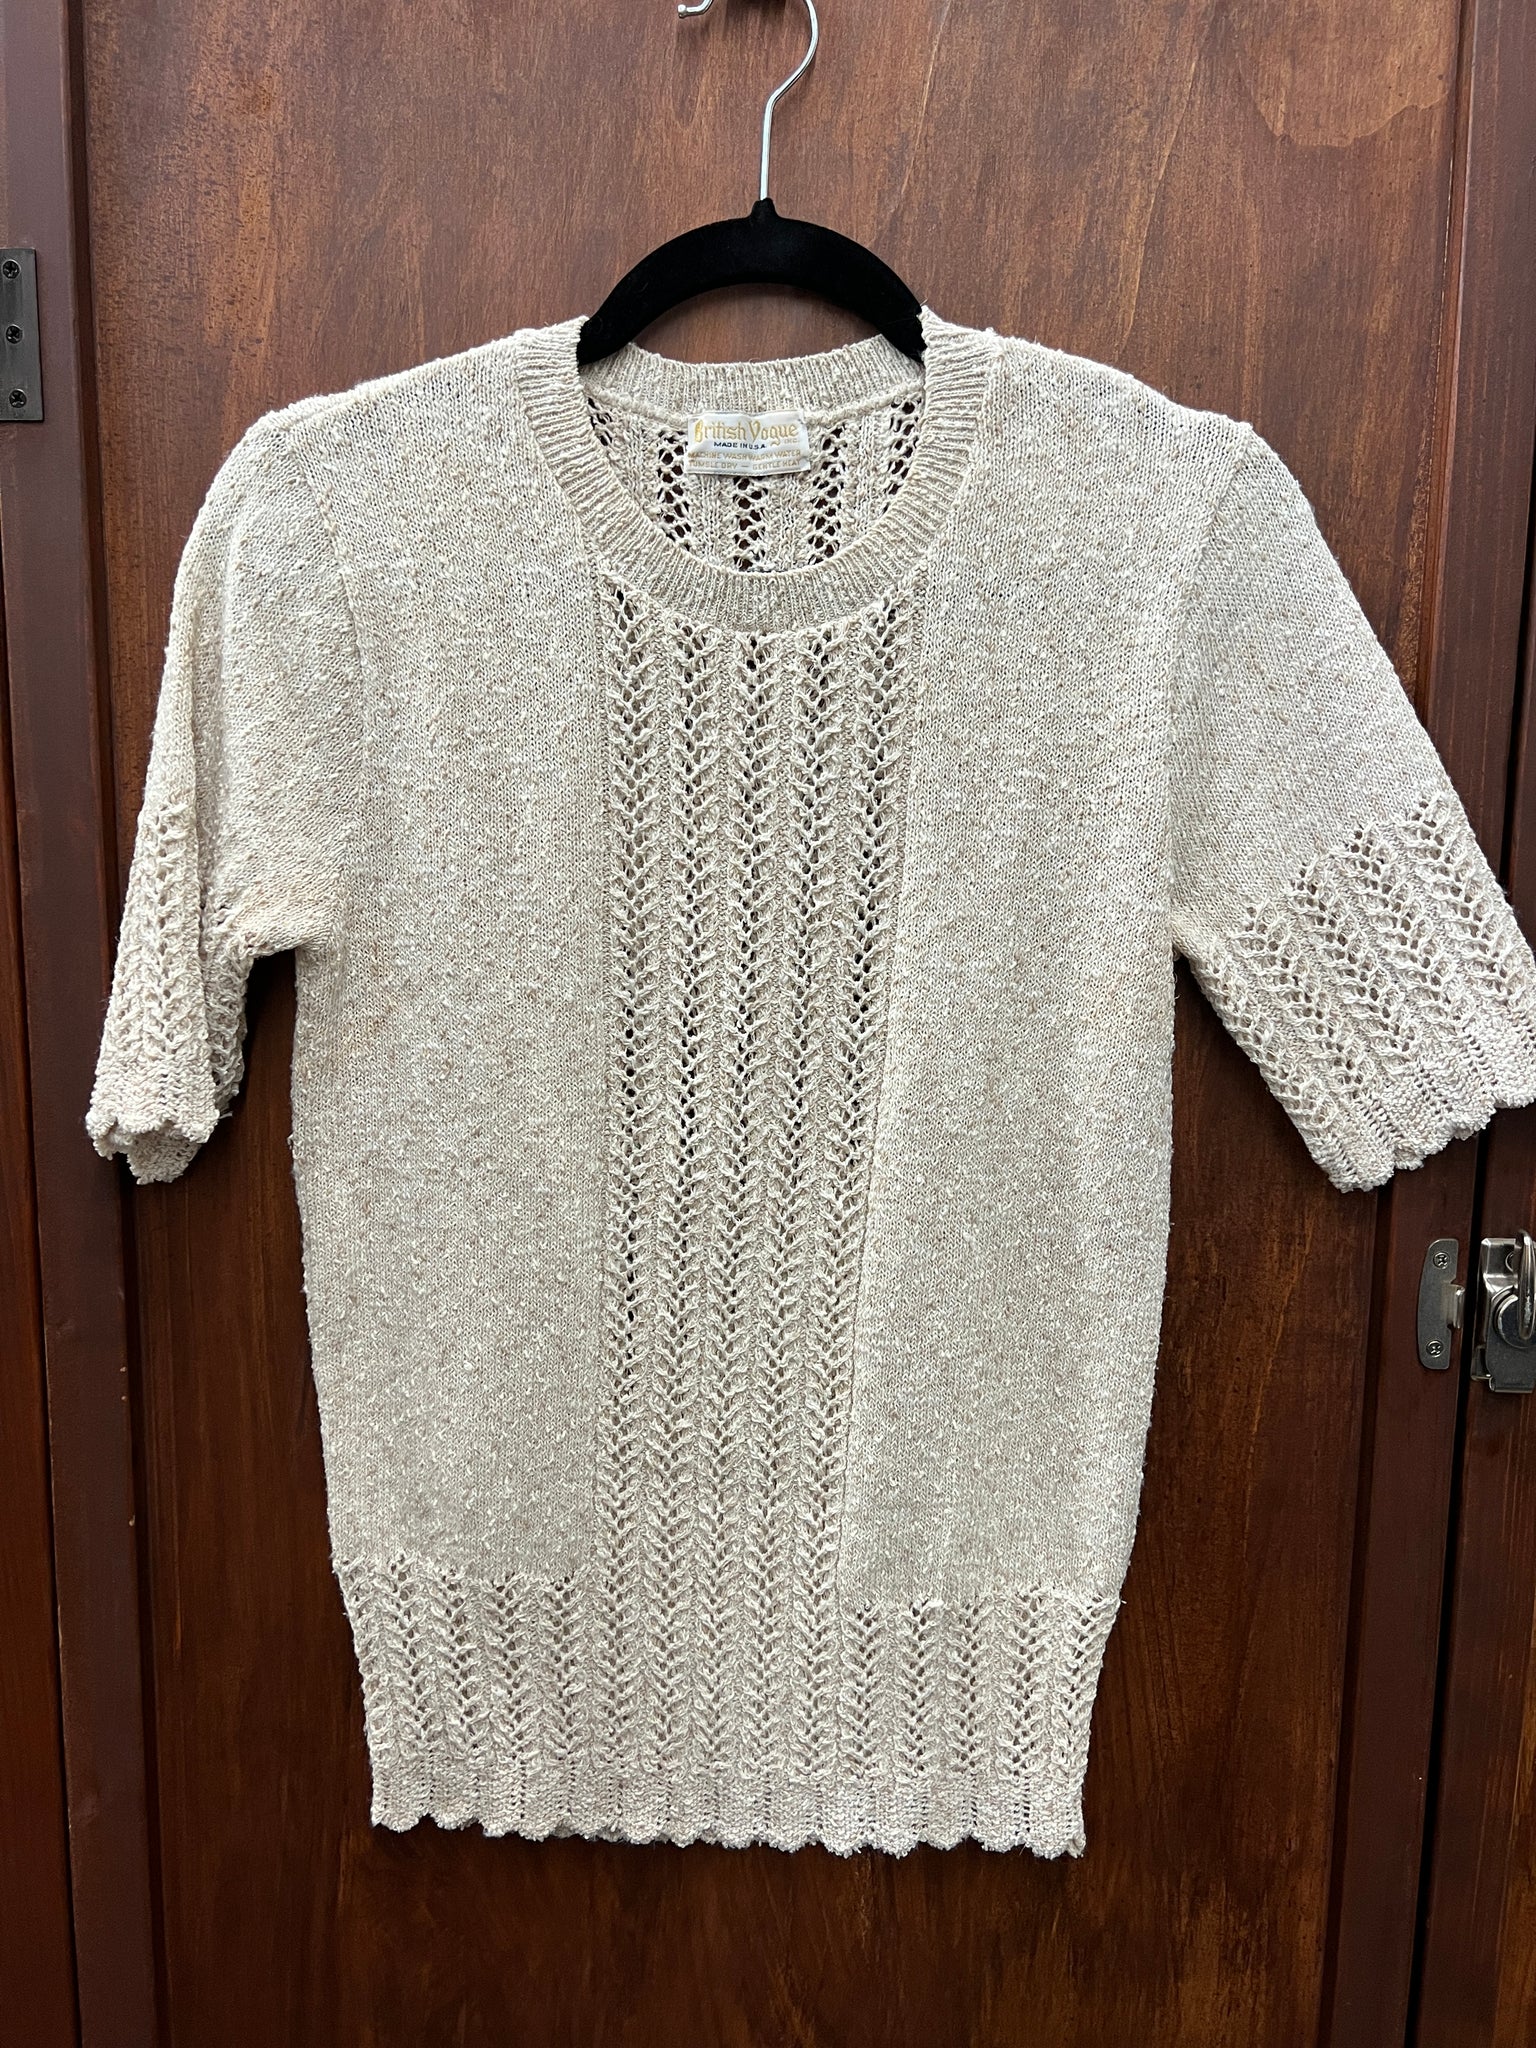 1970s SWEATER- British Vogue oatmeal short sleeve as